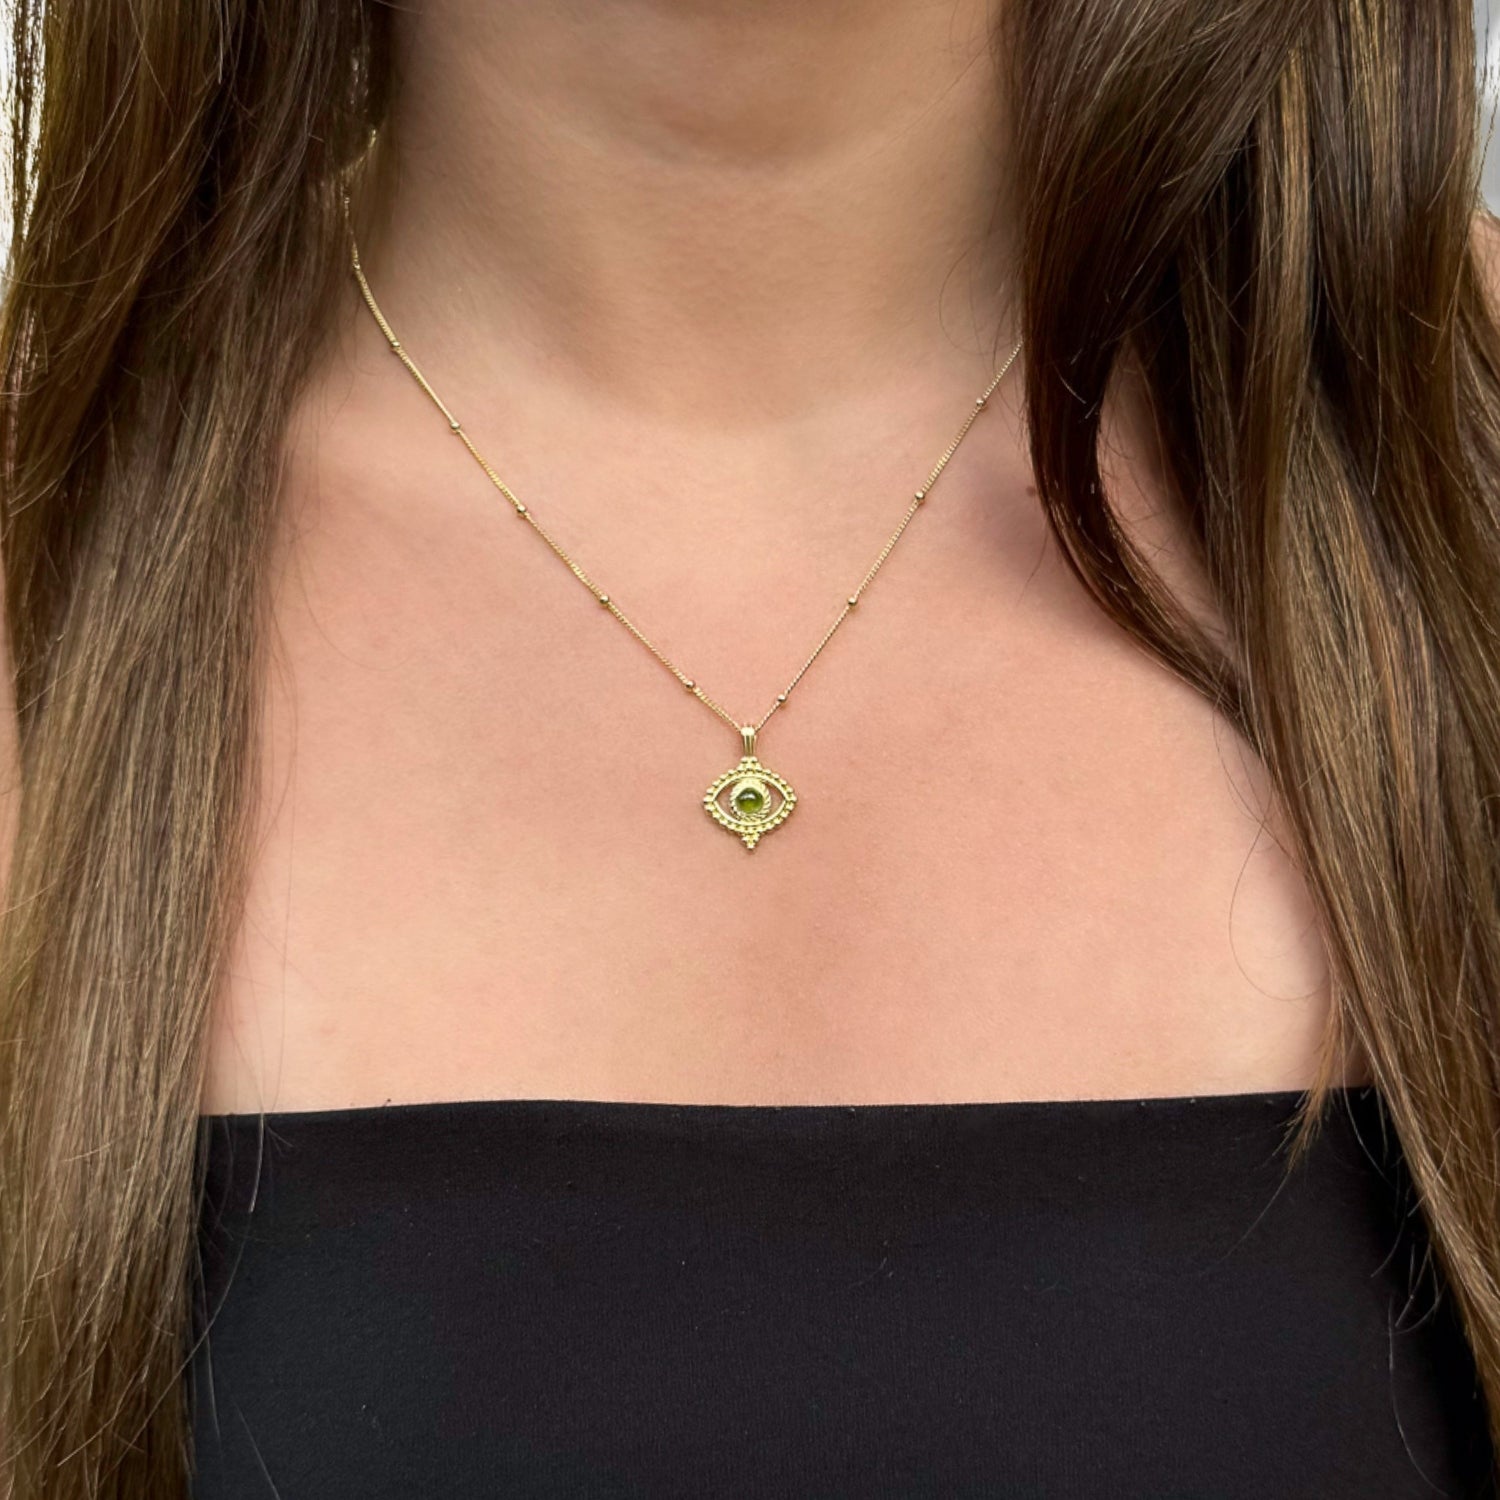 Thoughtful Design: Model Wearing Evil Eye Necklace for Good Luck